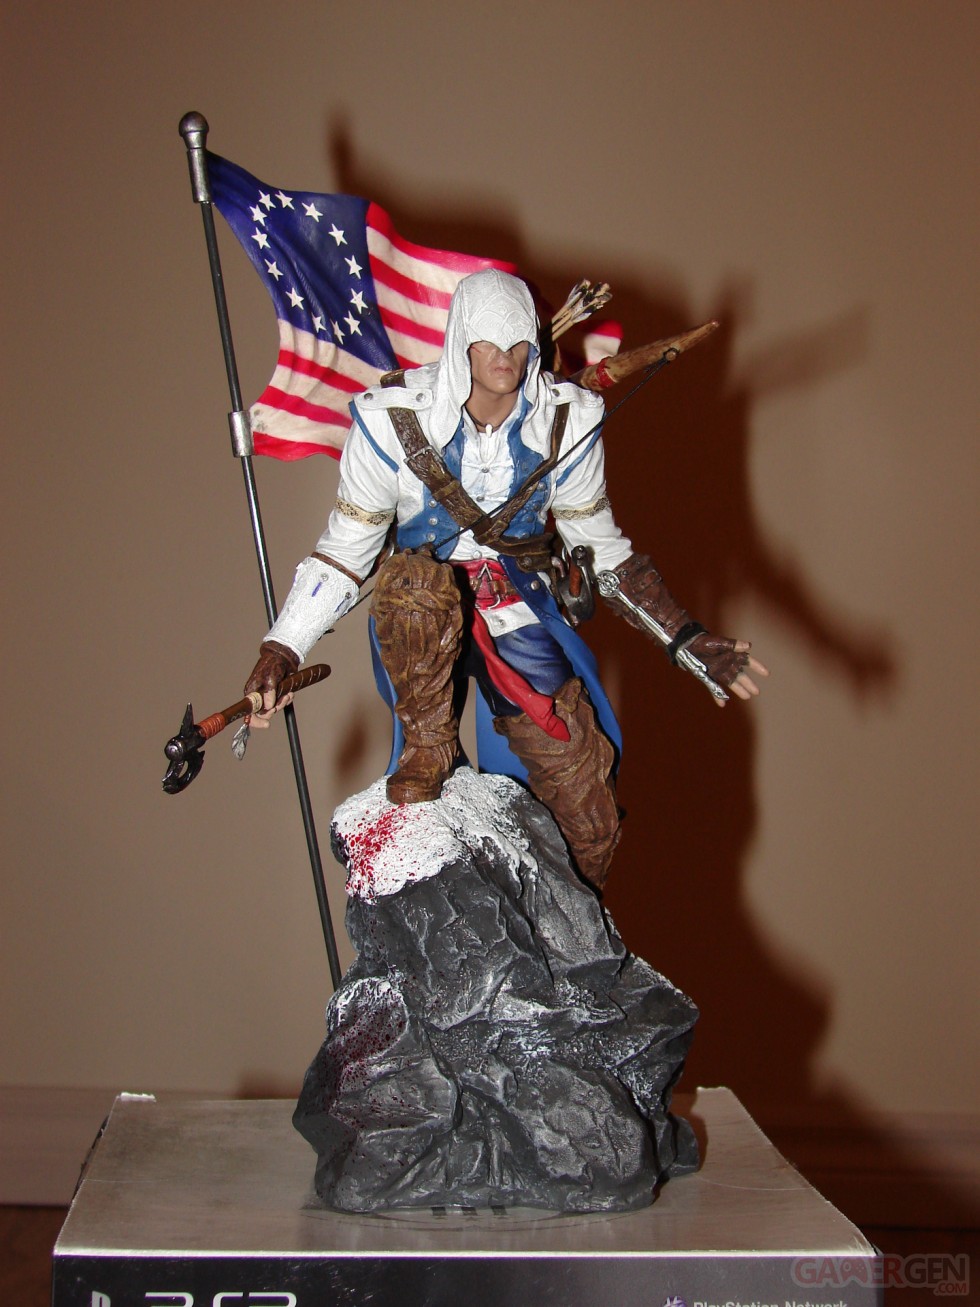 assassin-s-creed-III-collector-us-canada-limited-edition-photo-01